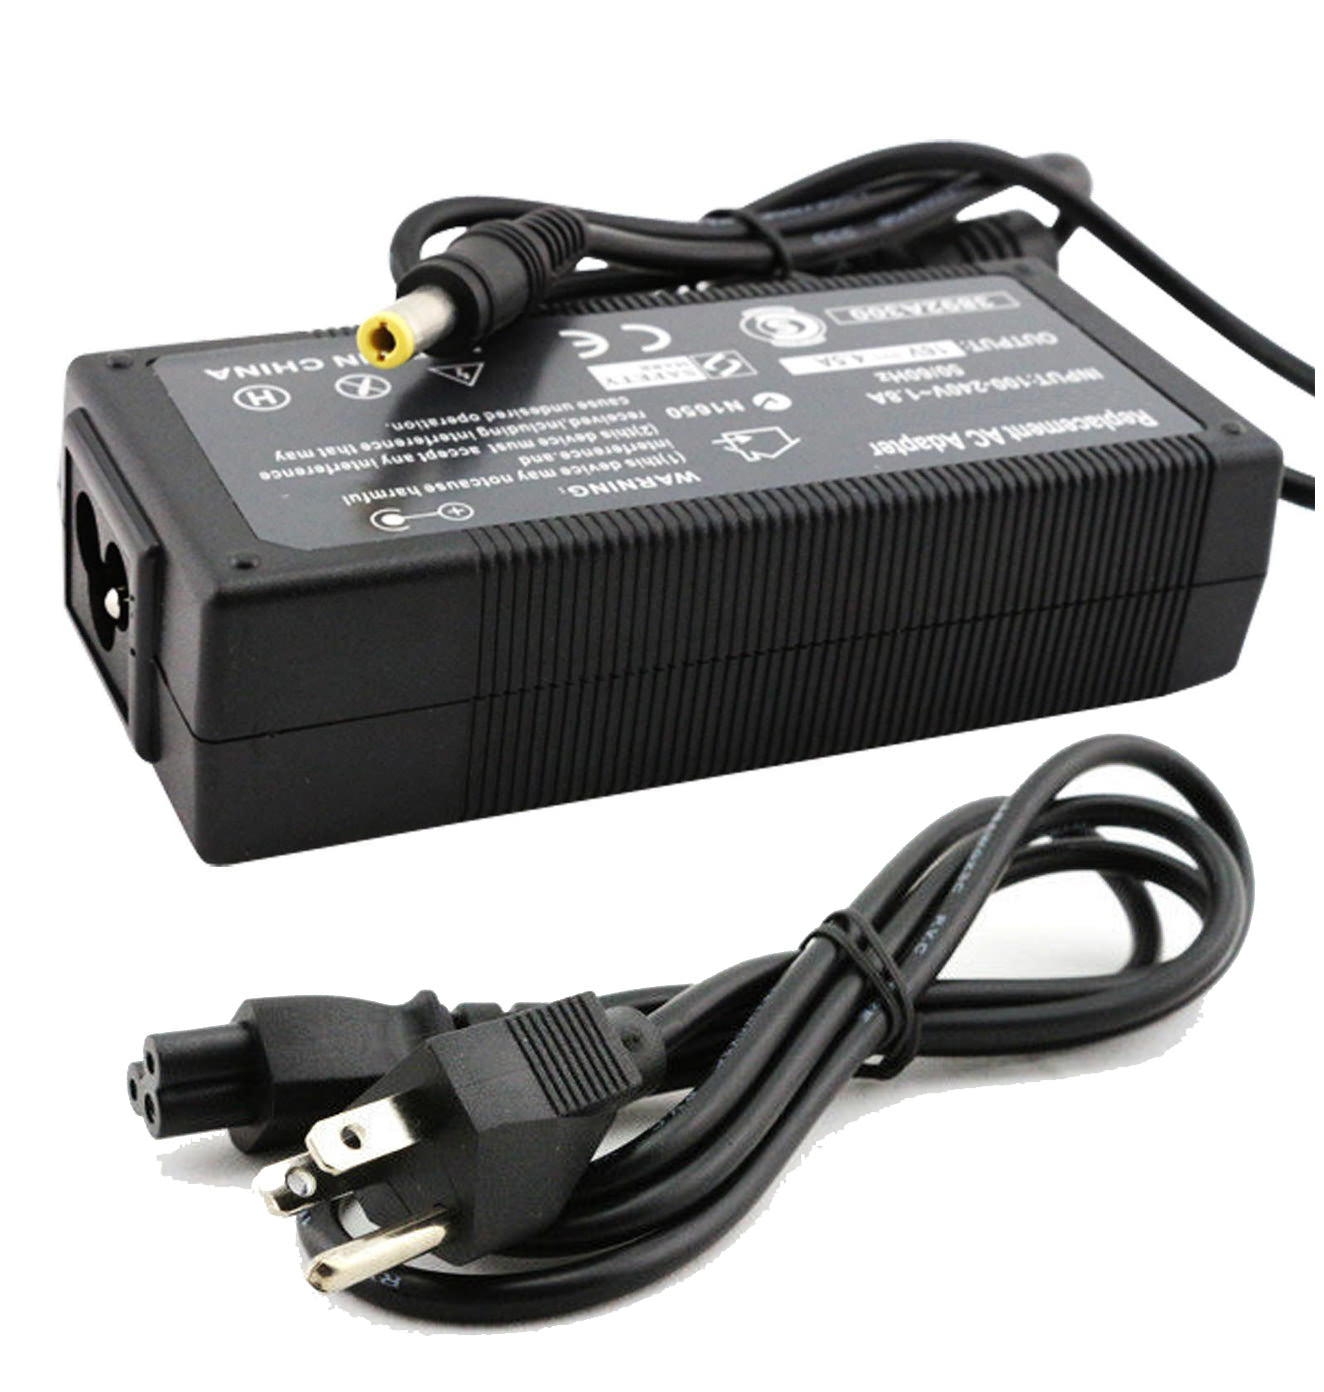 AC Adapter Charger for IBM ThinkPad T23 Notebook.